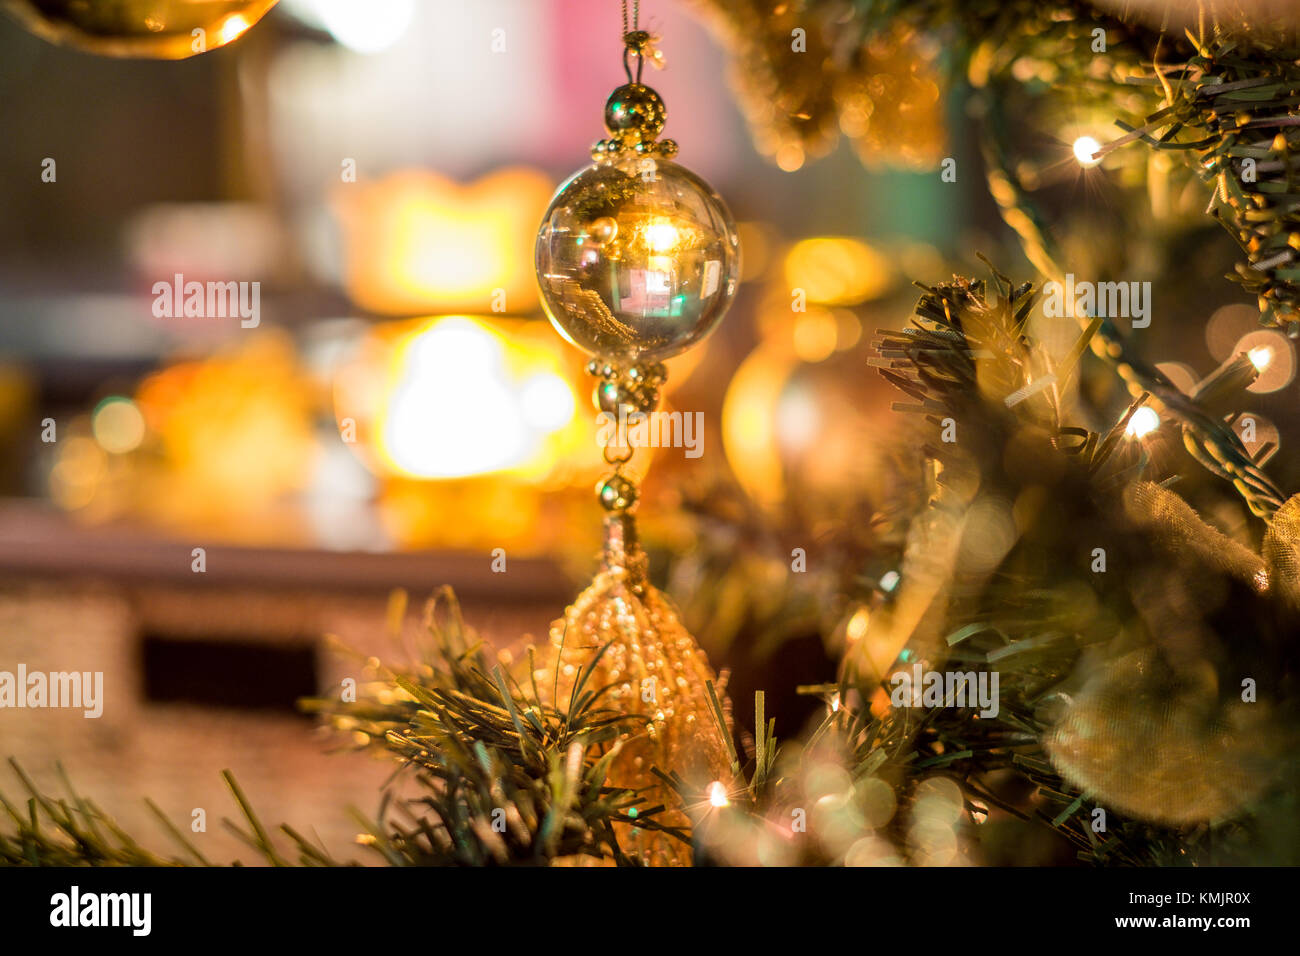 Christmas tree with baubles, trinkets and lights, in golden colours with a rustic, homely feel Stock Photo